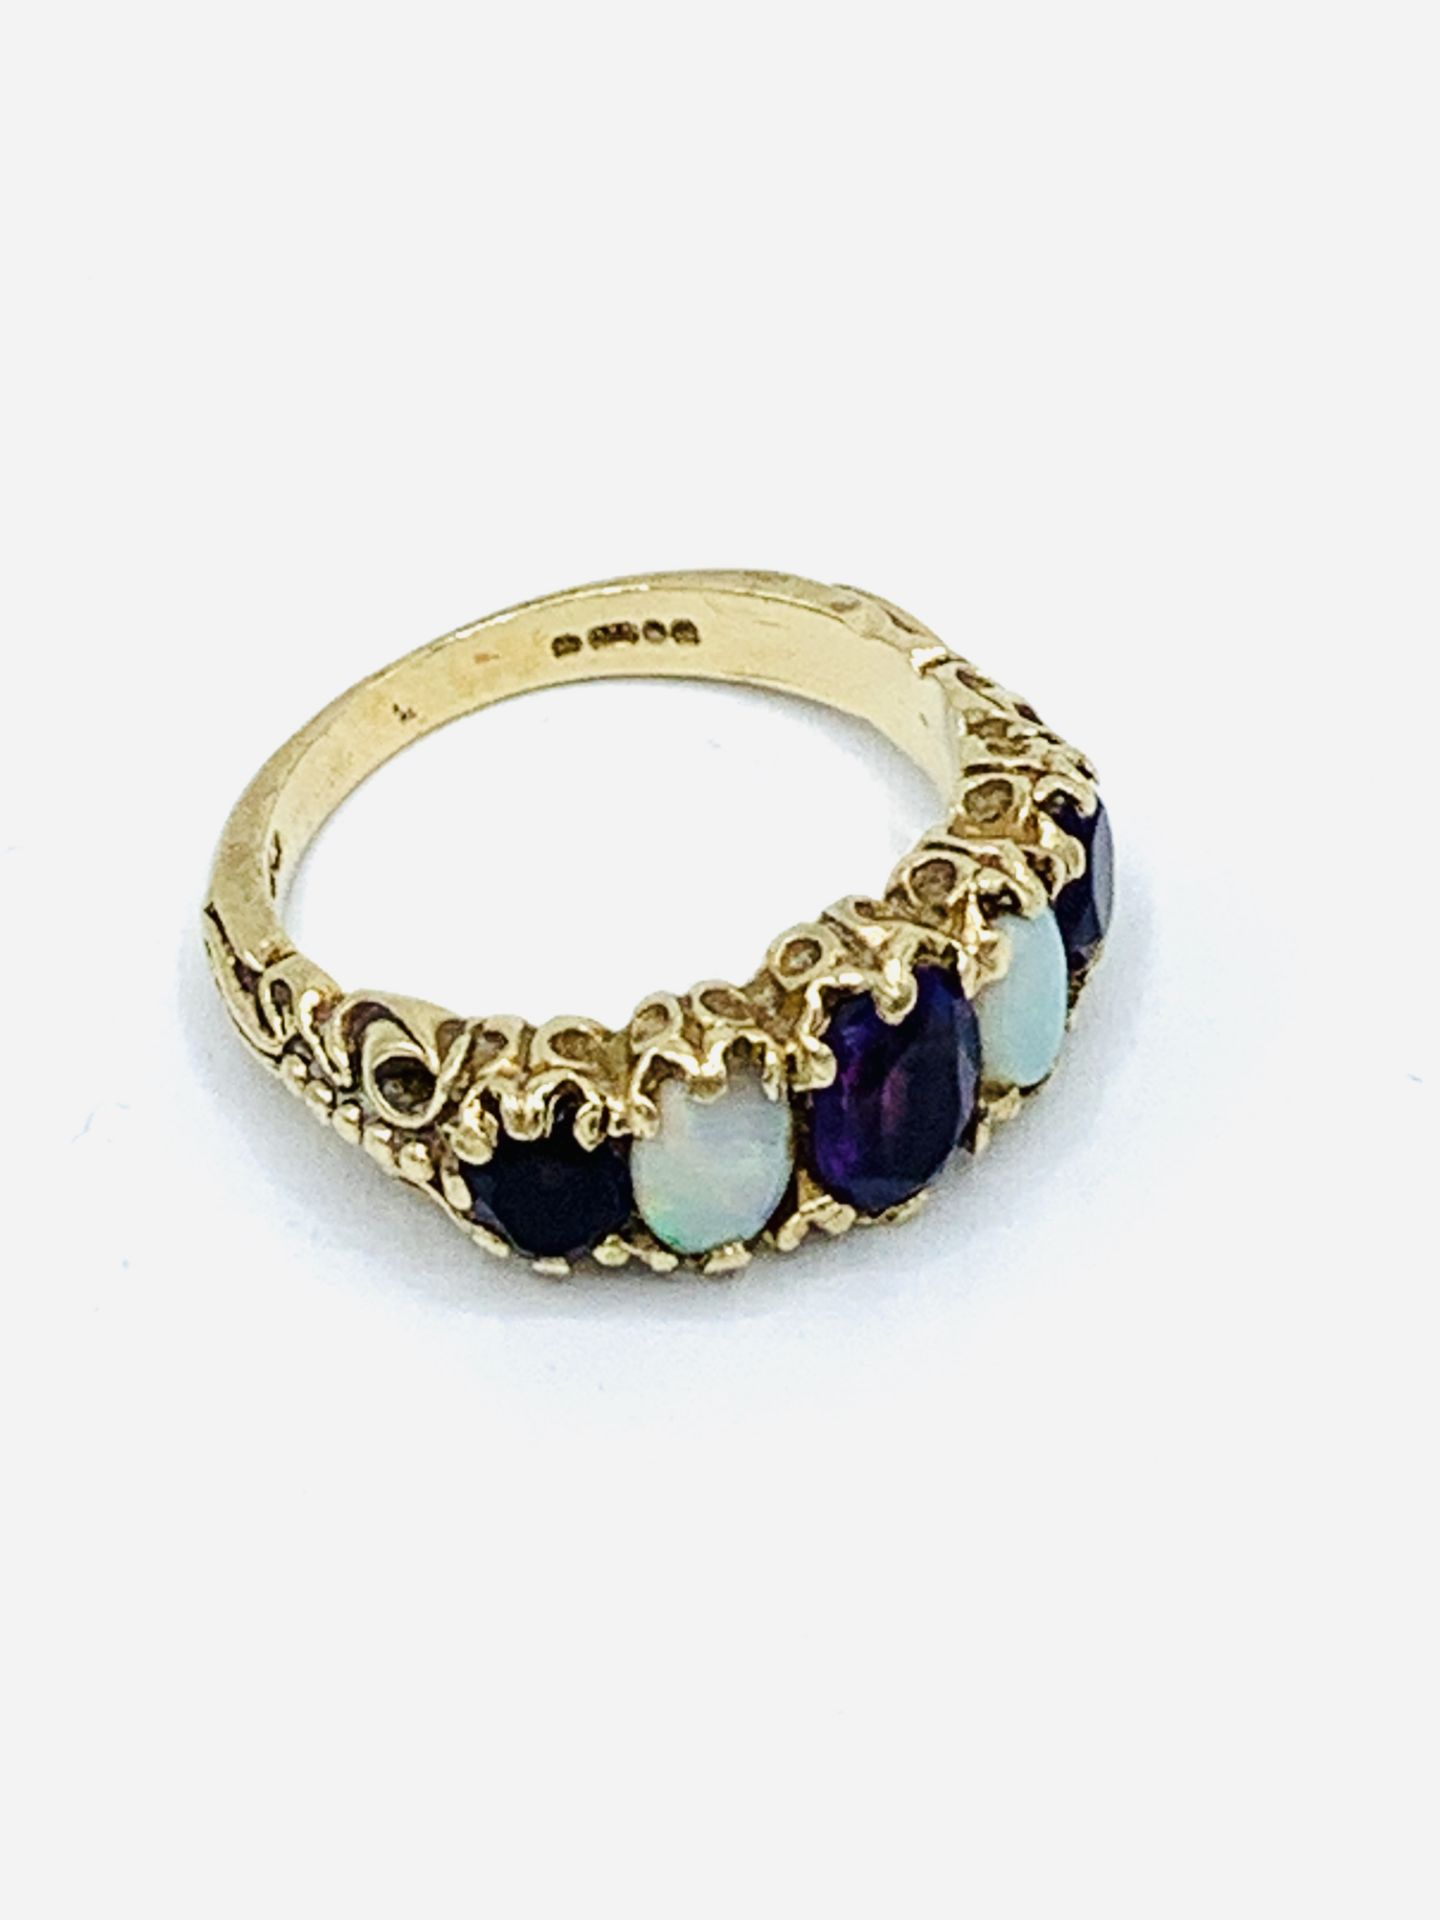 9ct gold opal and amethyst ring, size M, weight 4.1gms. - Image 2 of 4